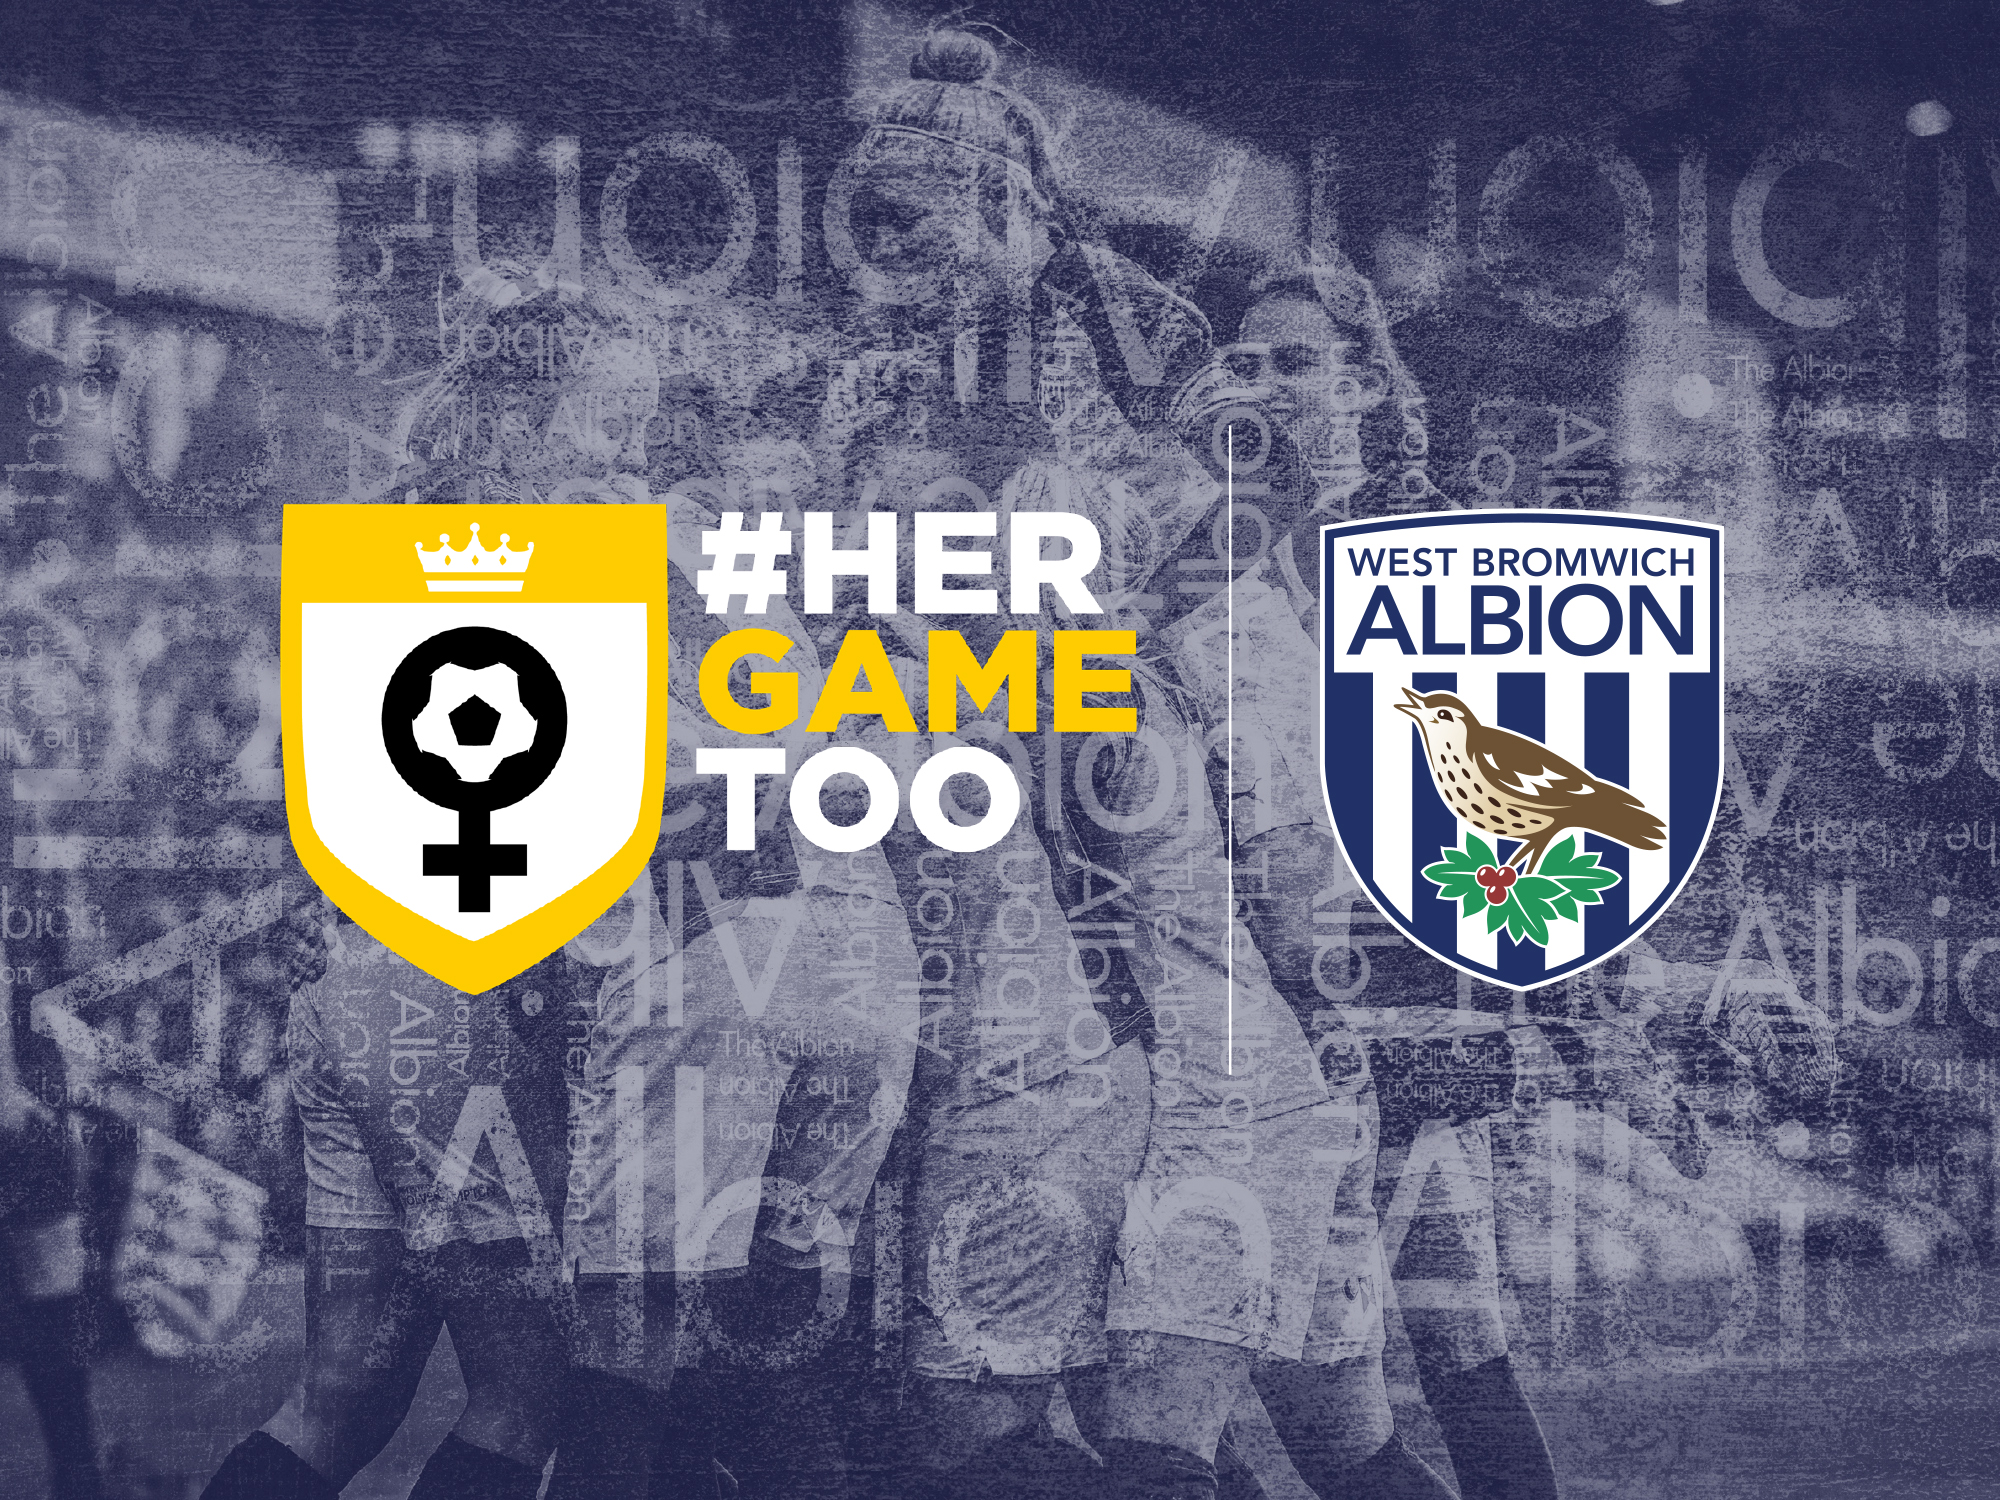 West Bromwich Albion is delighted to confirm a new partnership with Her Game Too - a campaign group which aims to raise awareness of sexist abuse in football